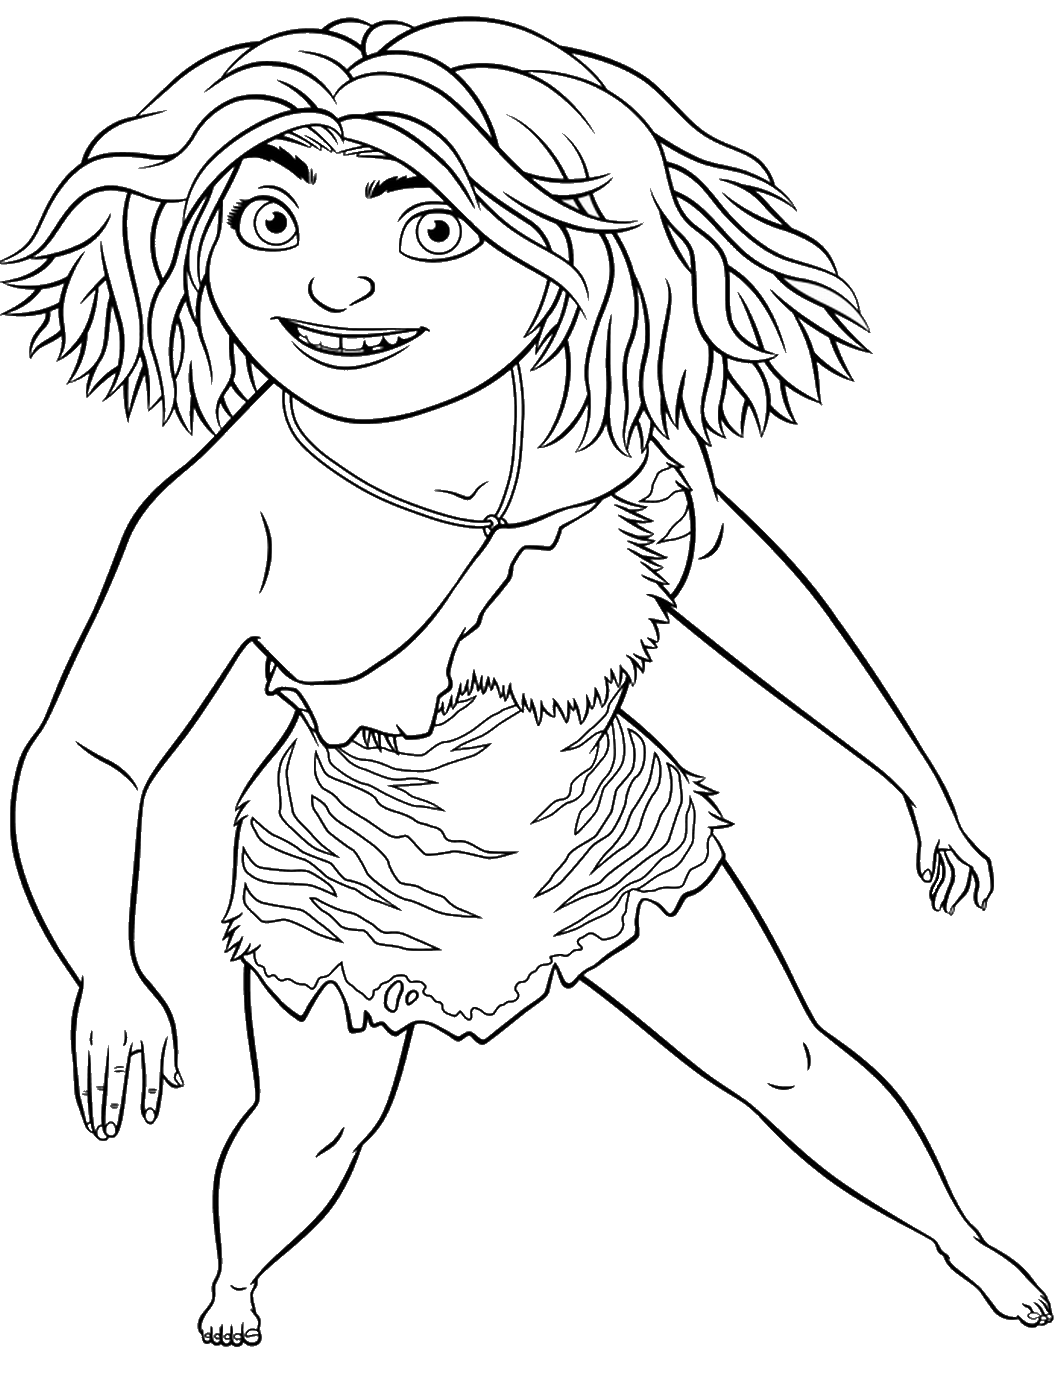 The Croods Coloring Pages TV Film croods_cl_131 Printable 2020 08581 Coloring4free